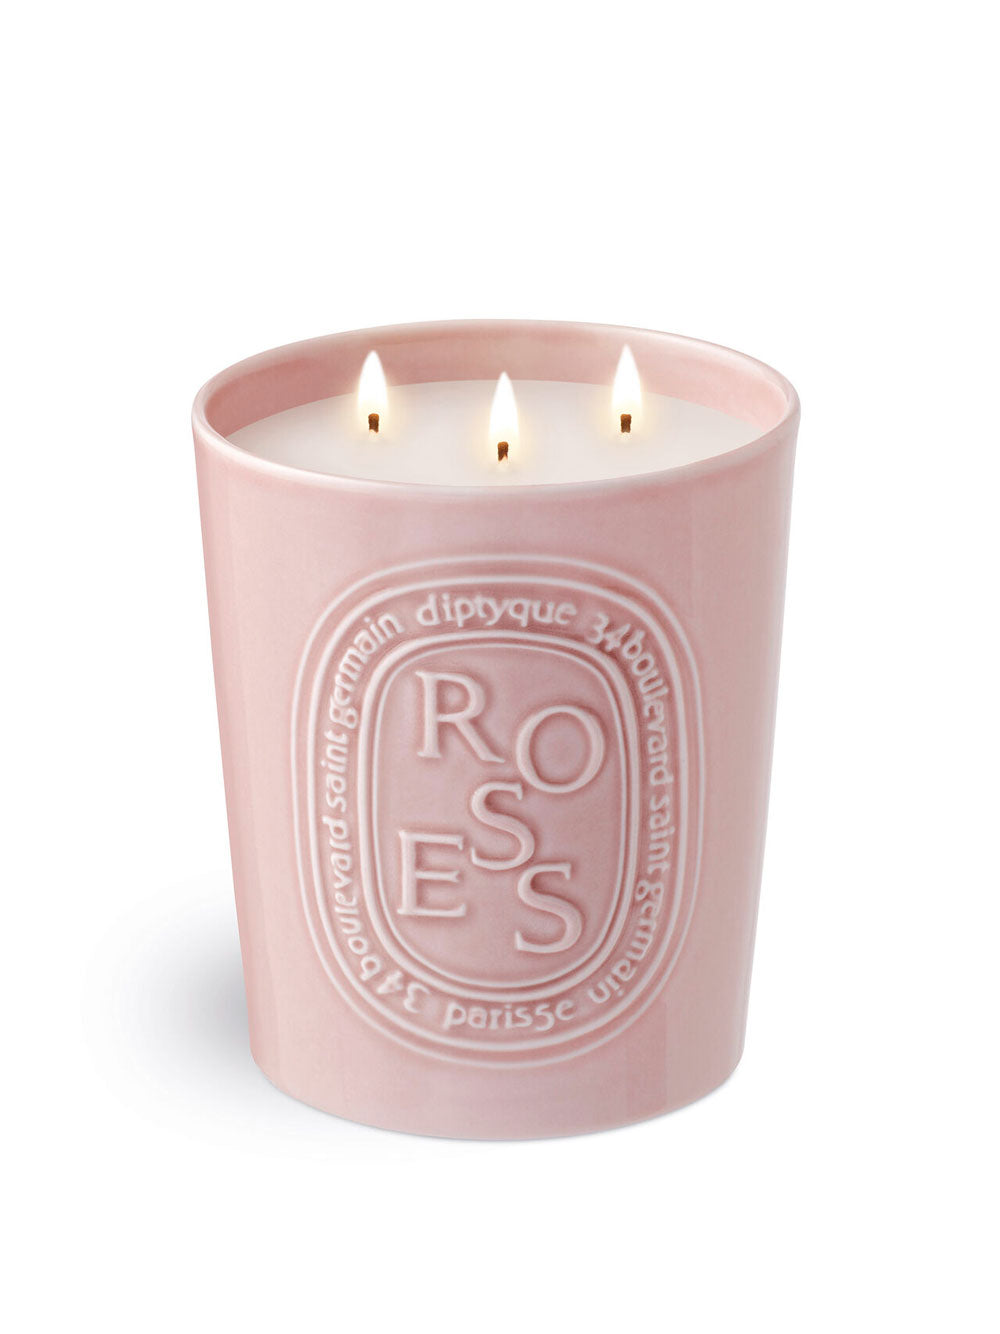 Roses candle 600g